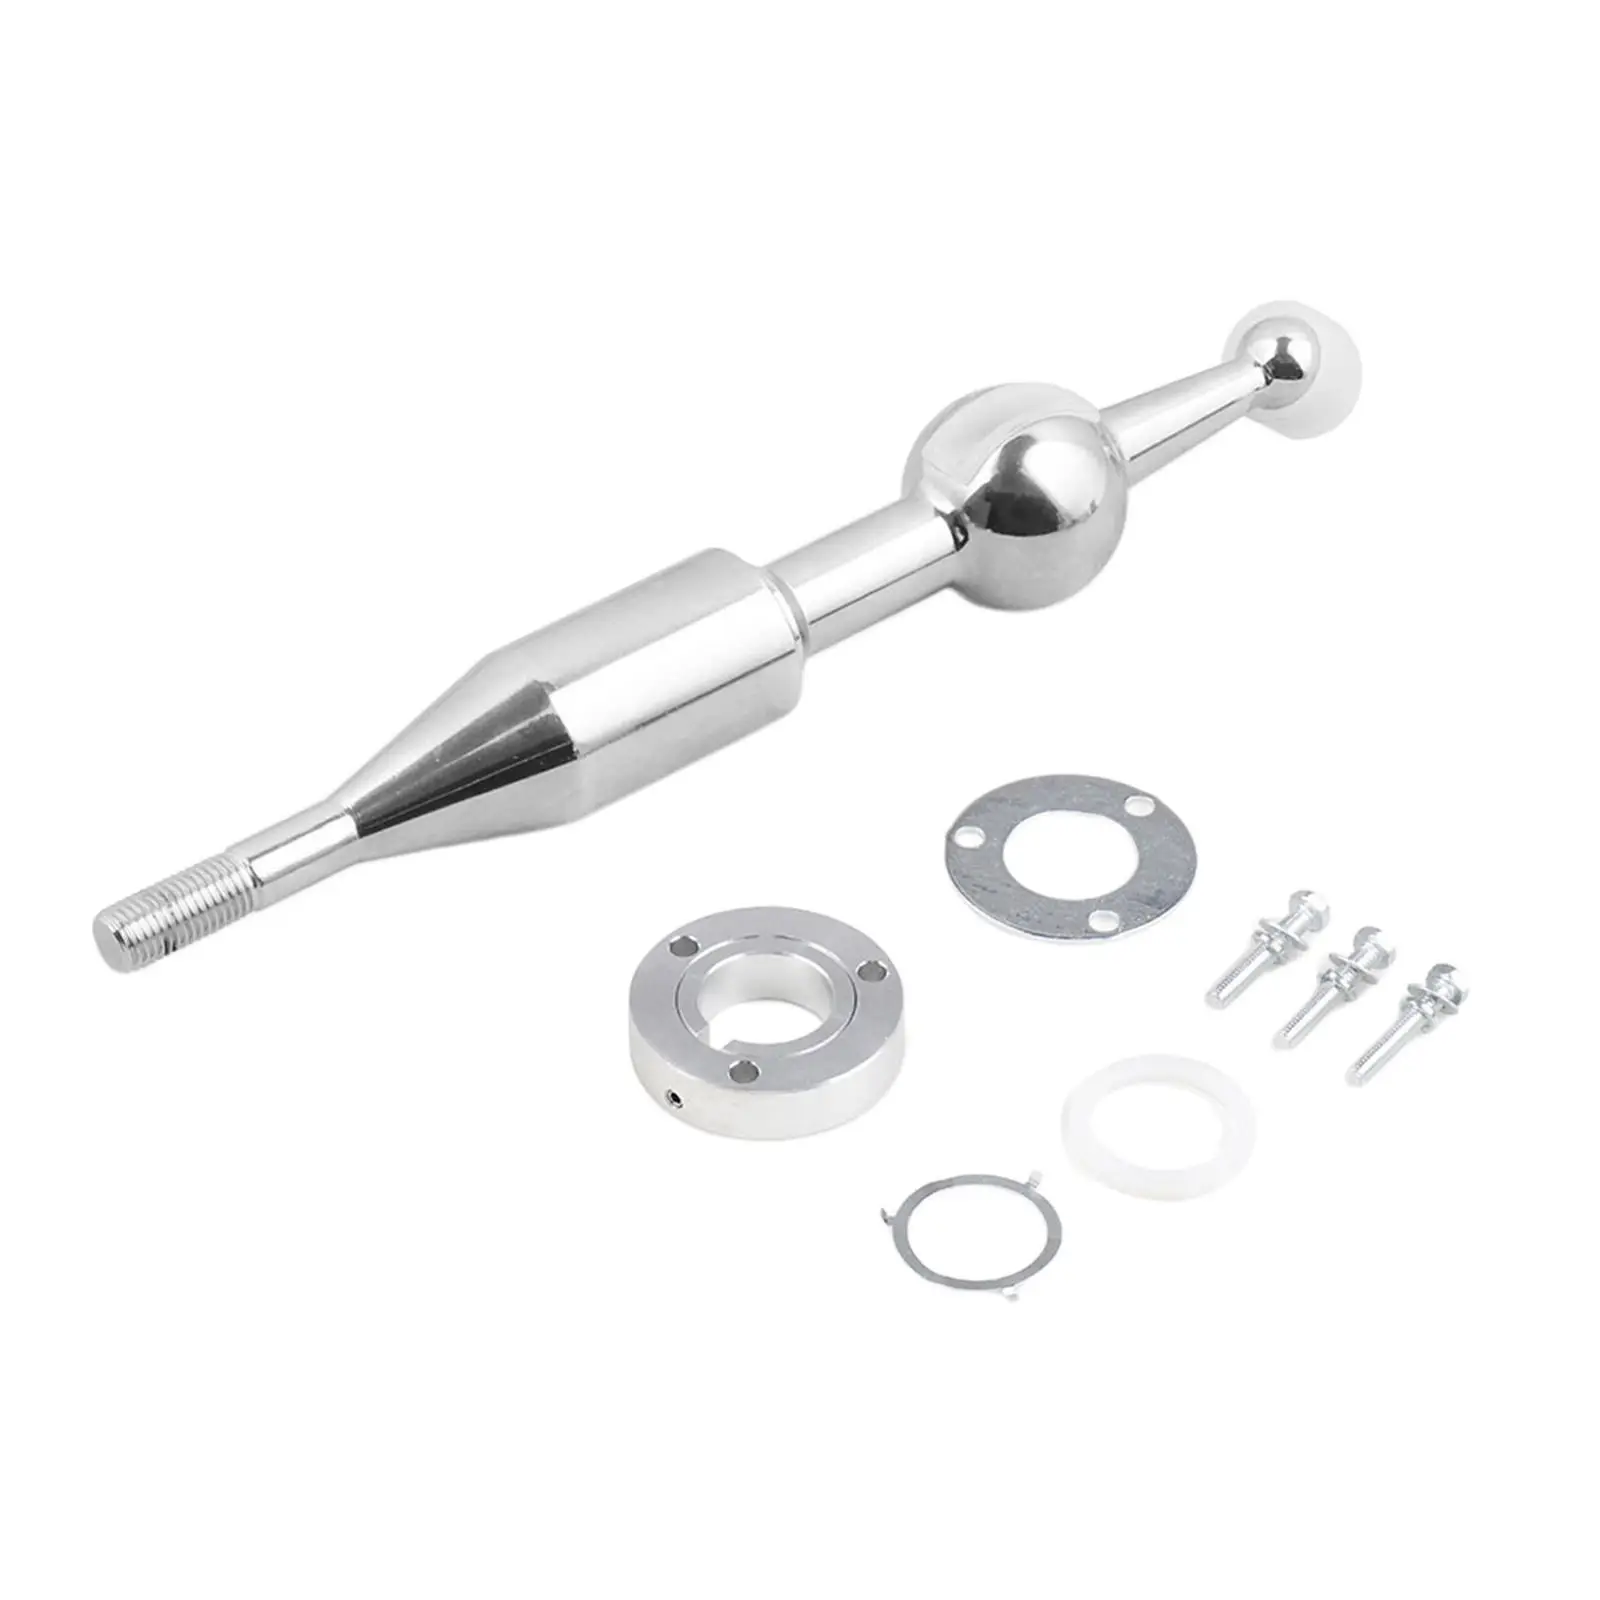 Gear Lever Modified Silver Manual Transmission Throw Short Shifter Lever Aluminum Alloy Kit for Mazda RX-7 1986-1991